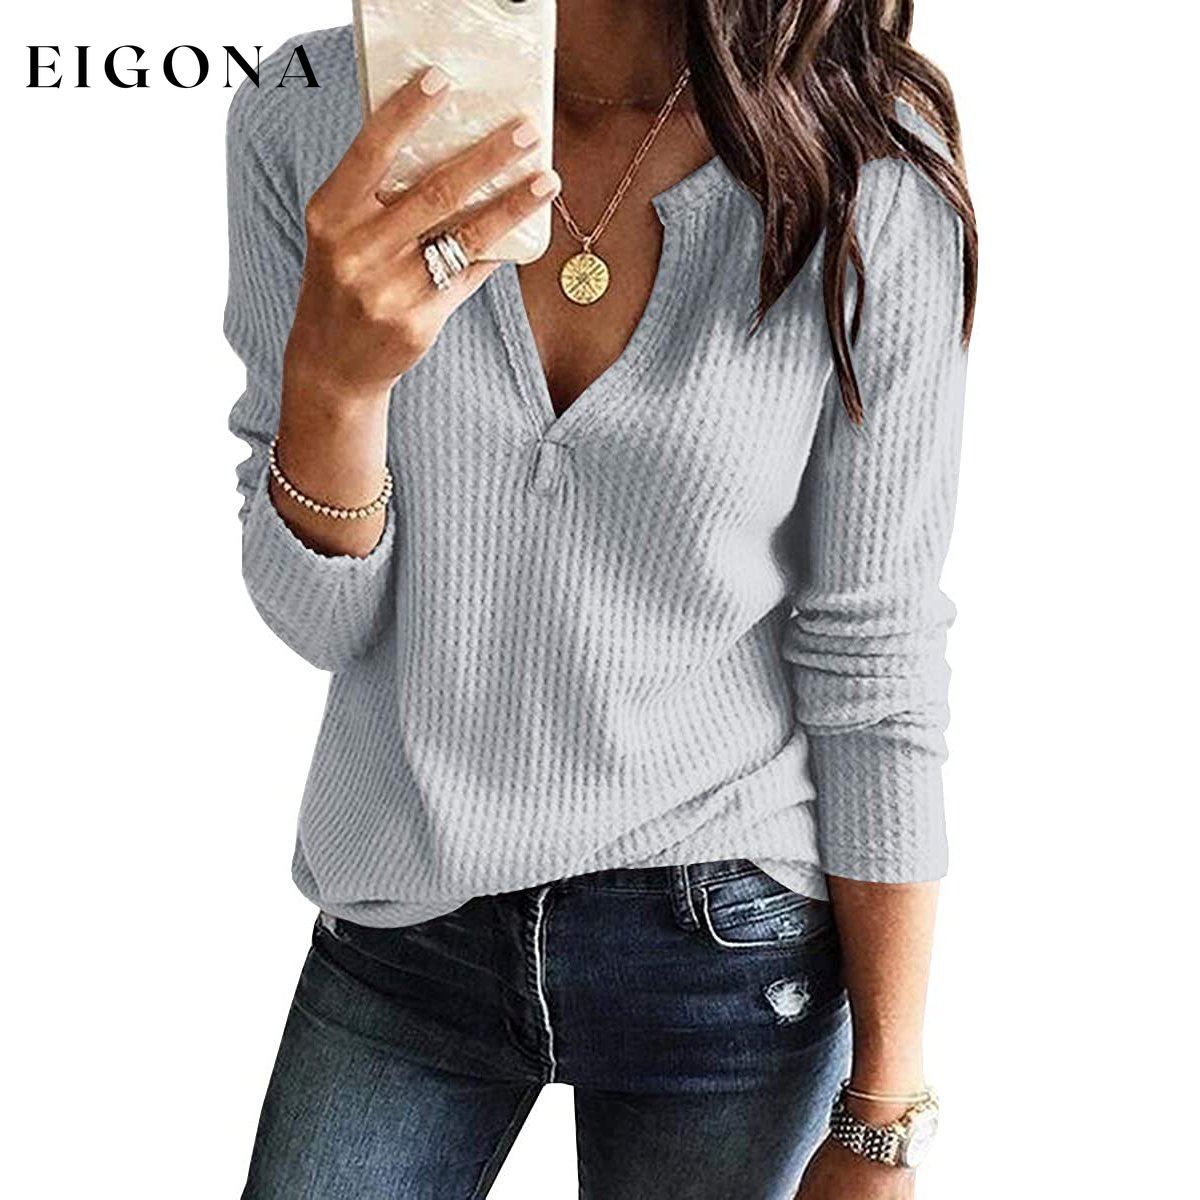 Women's V Neck Waffle Knit Henley Tops Gray __stock:500 clothes refund_fee:800 tops